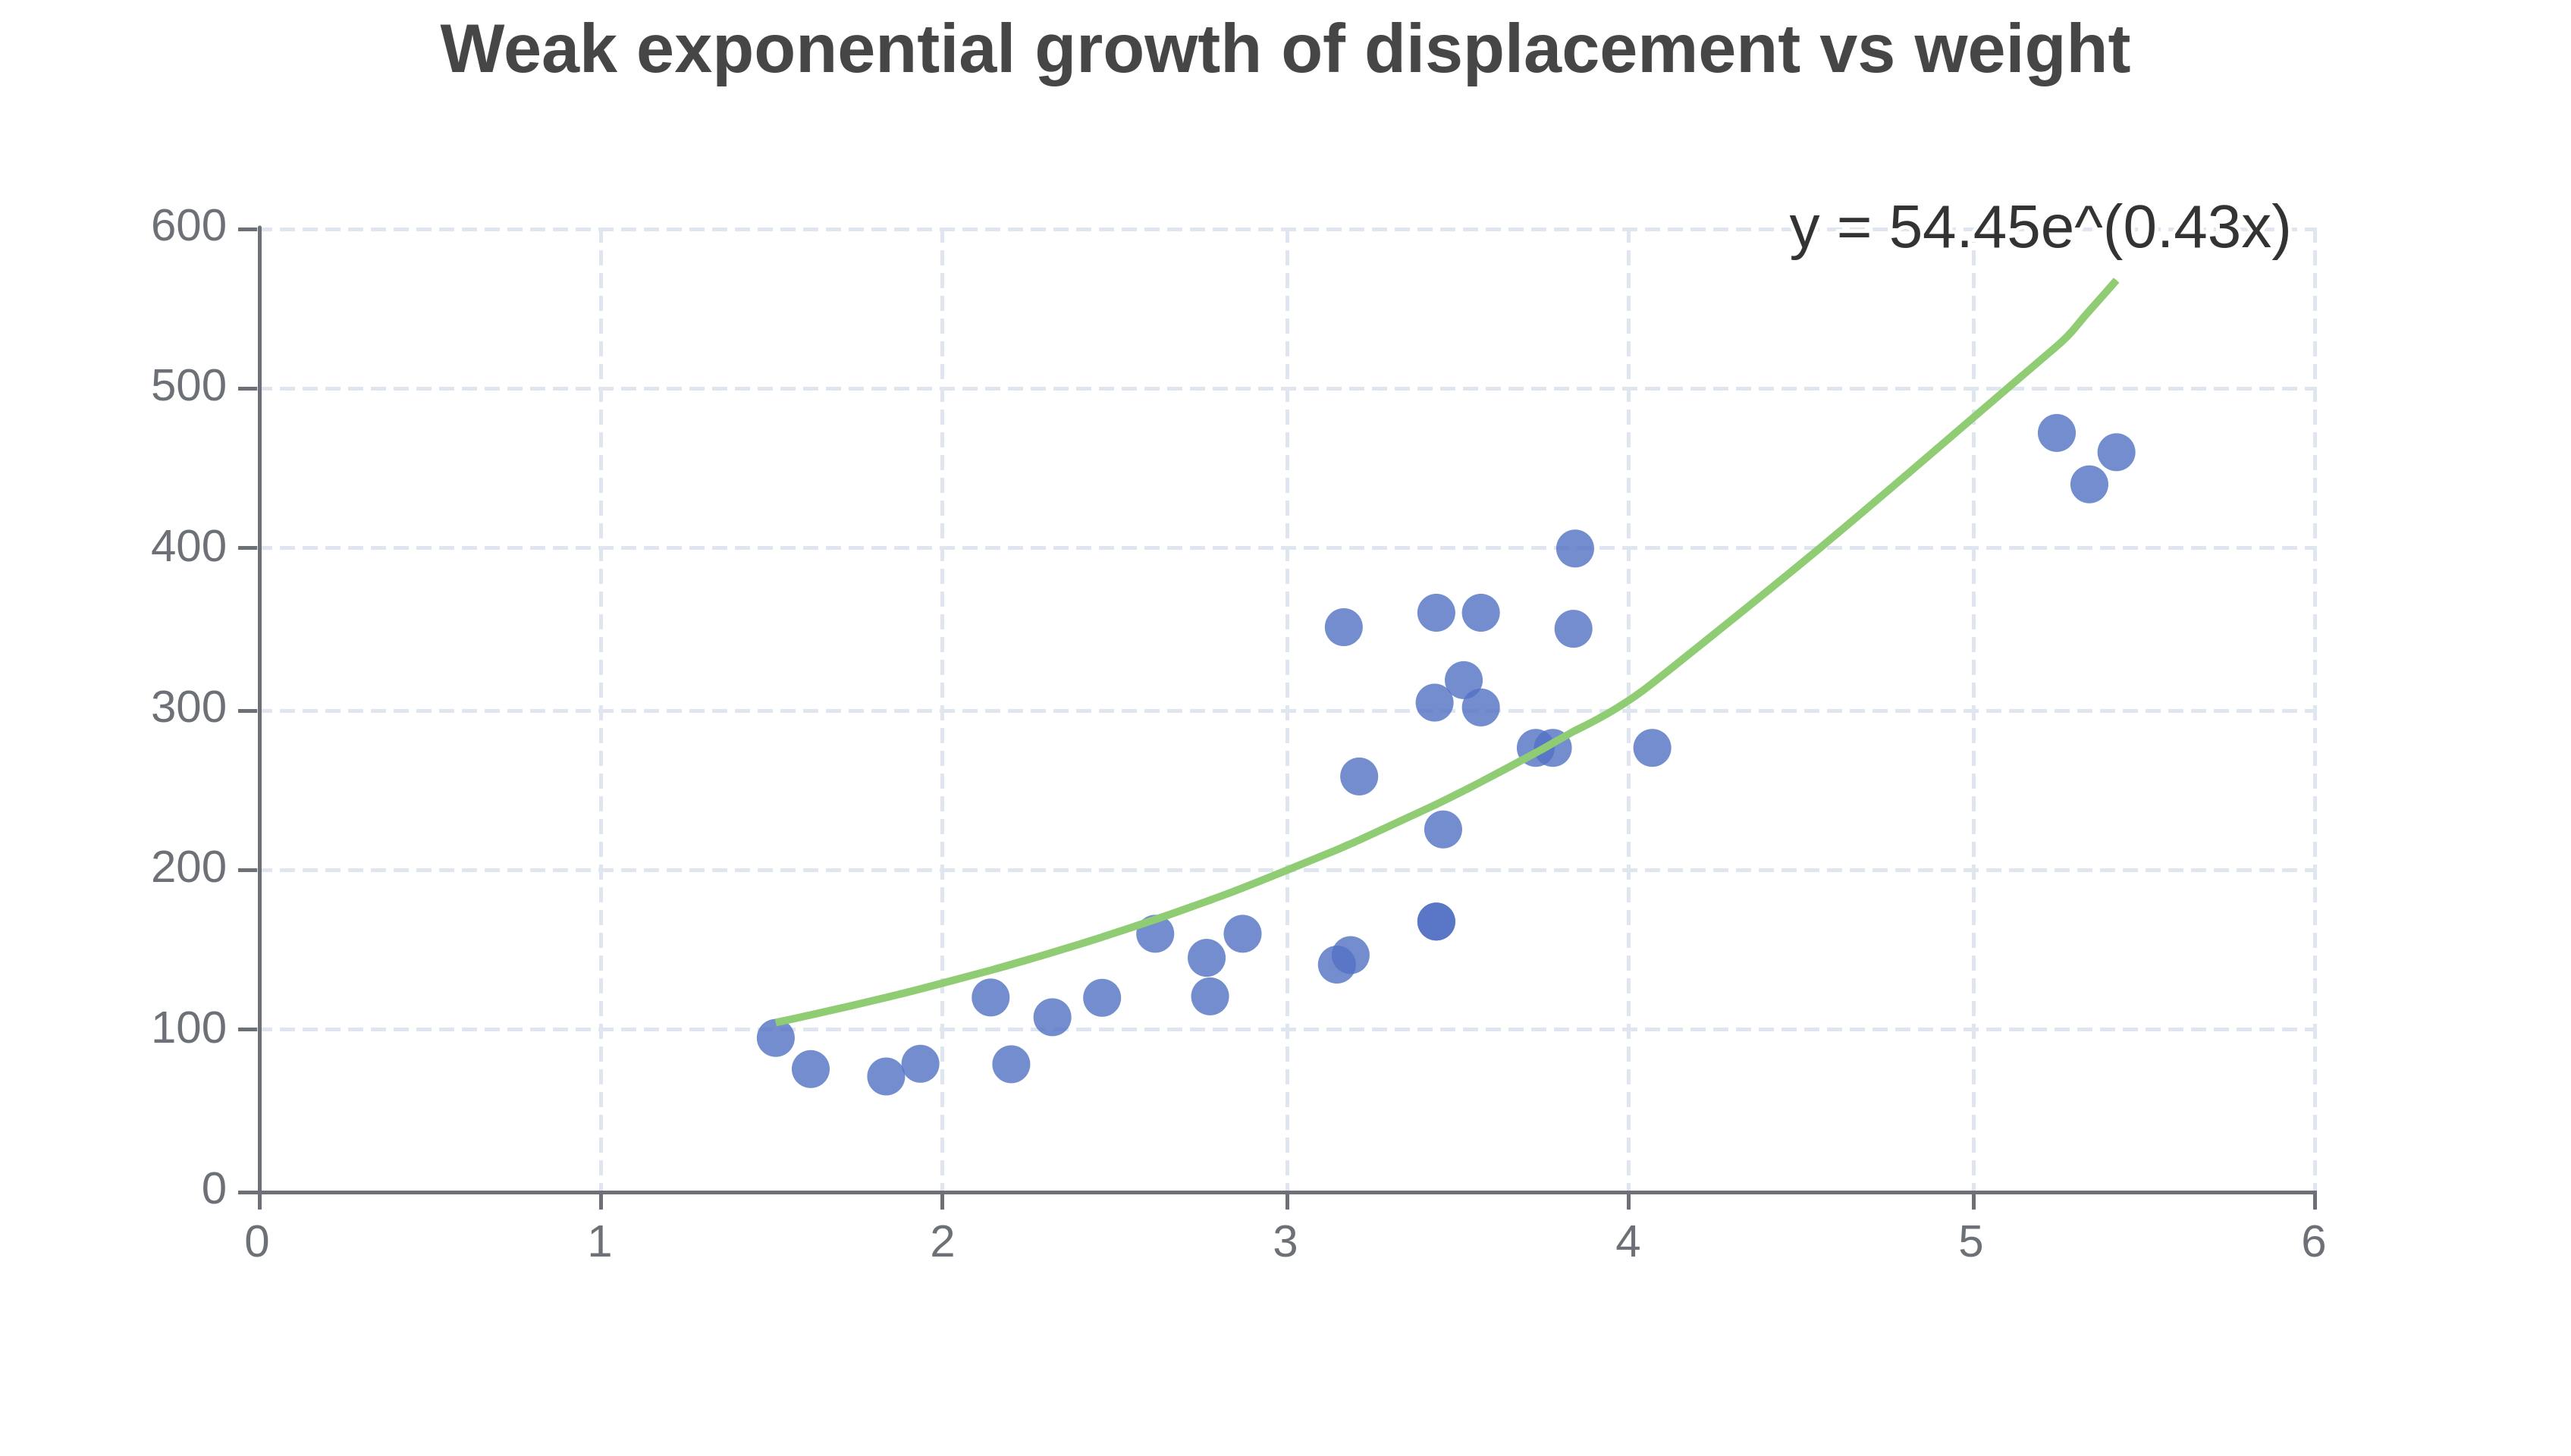 Exponential growth curve